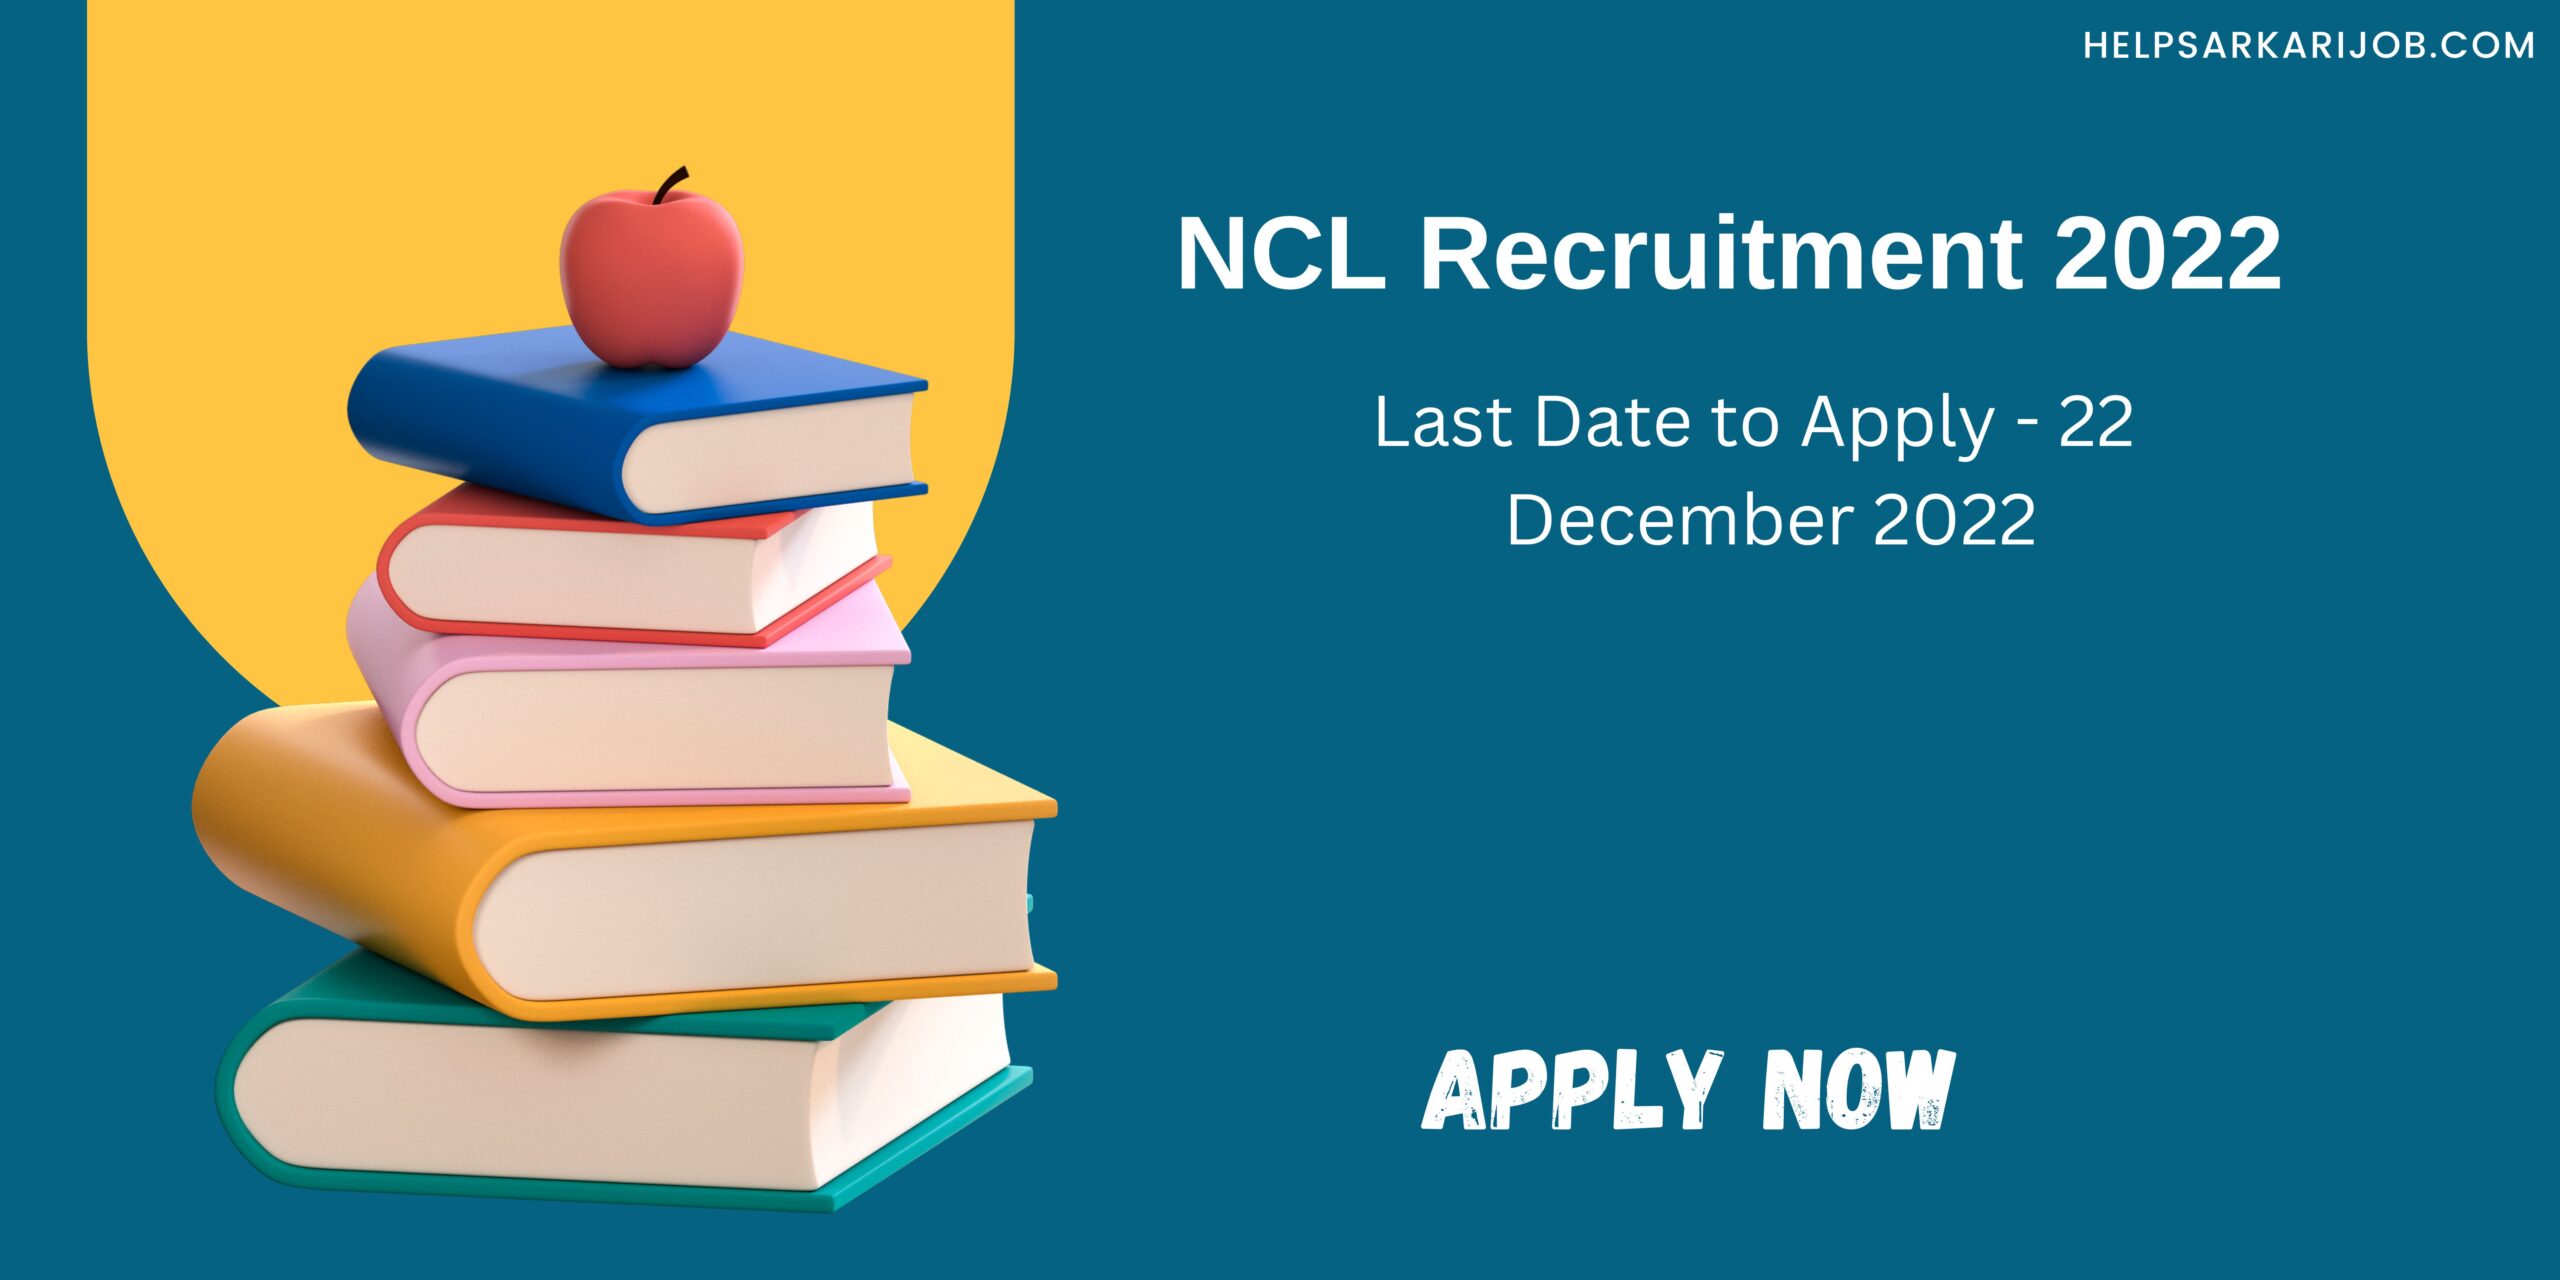 NCL Recruitment 2022 last date to apply